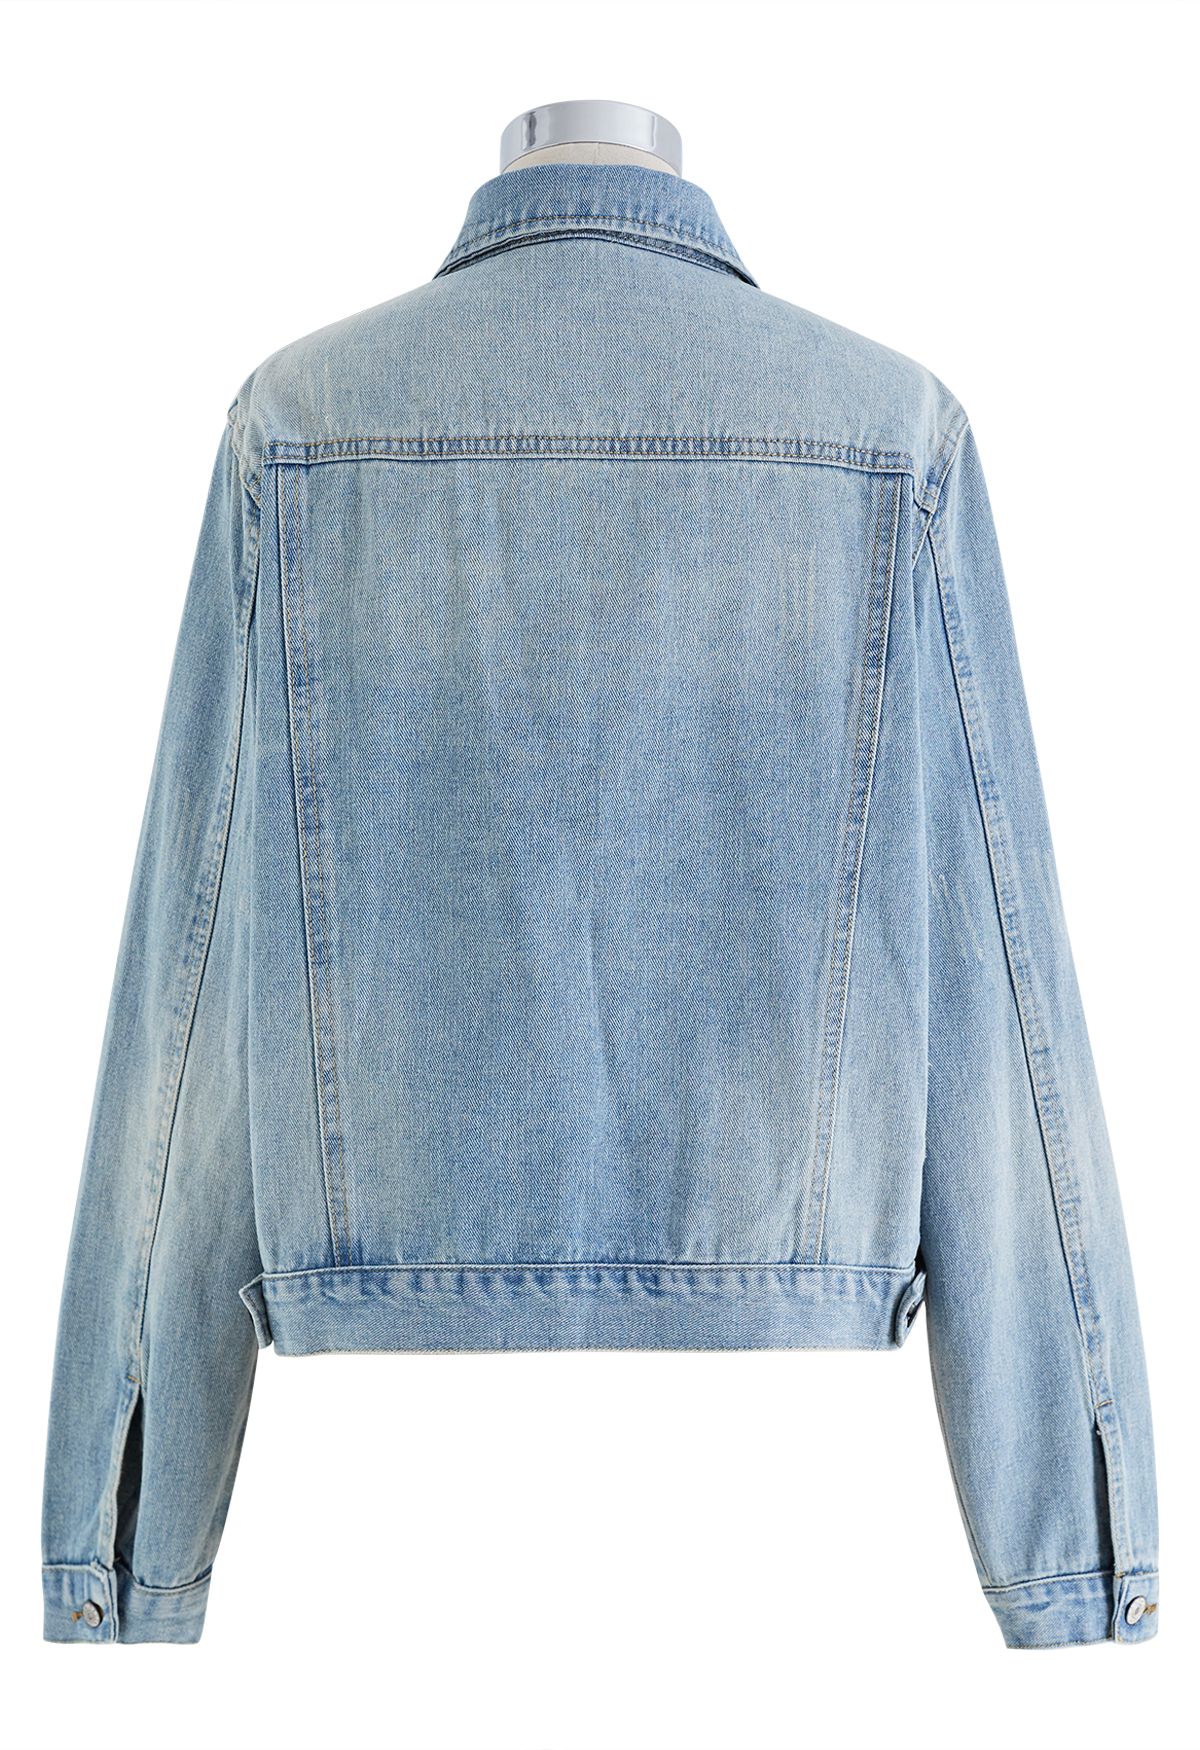 Bust Pocket Collared Denim Jacket in Light Blue - Retro, Indie and ...